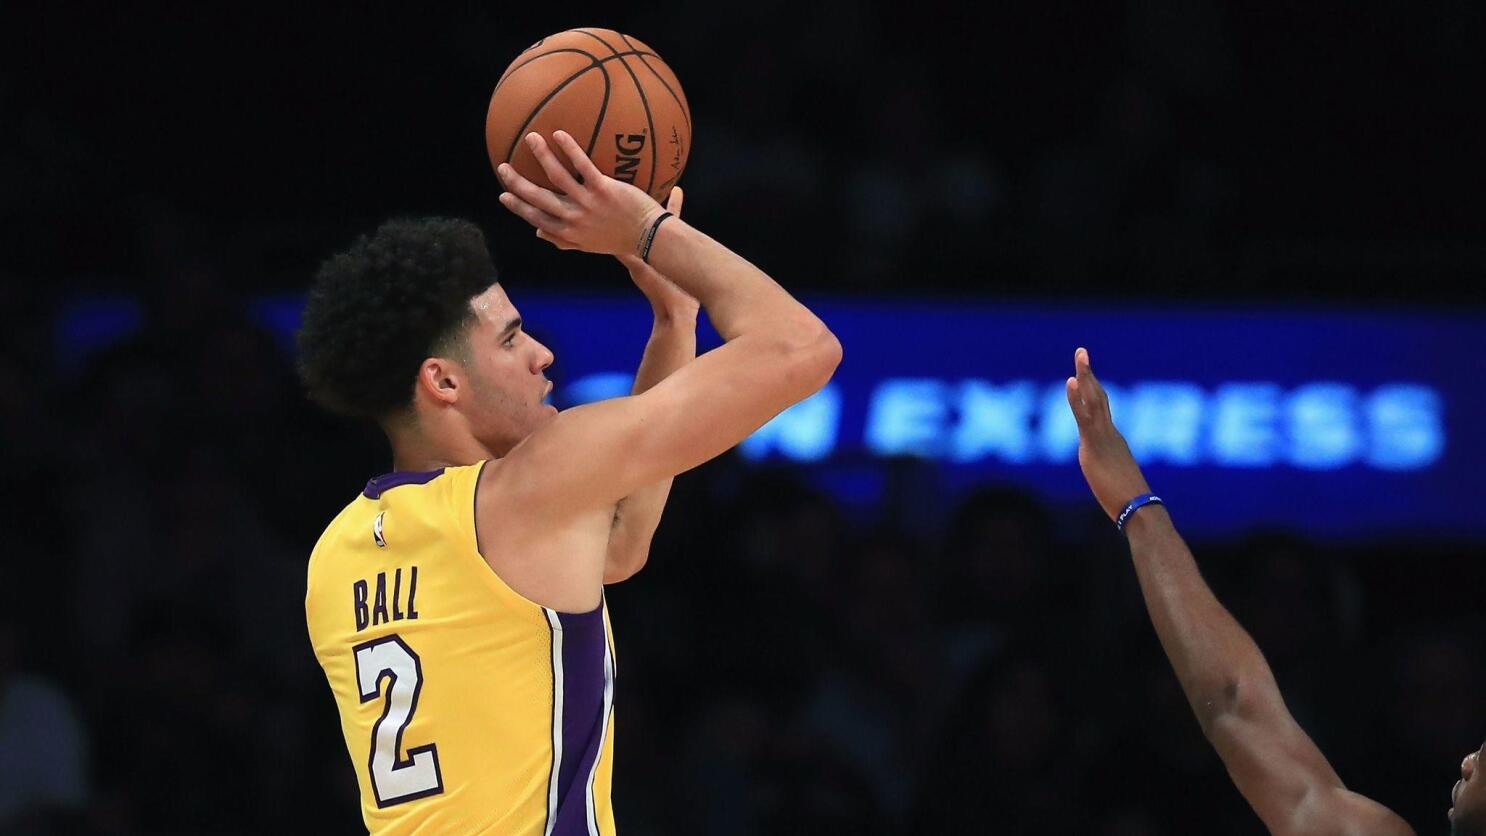 Anthony Davis' injury thrusts the Lakers' focal point back to